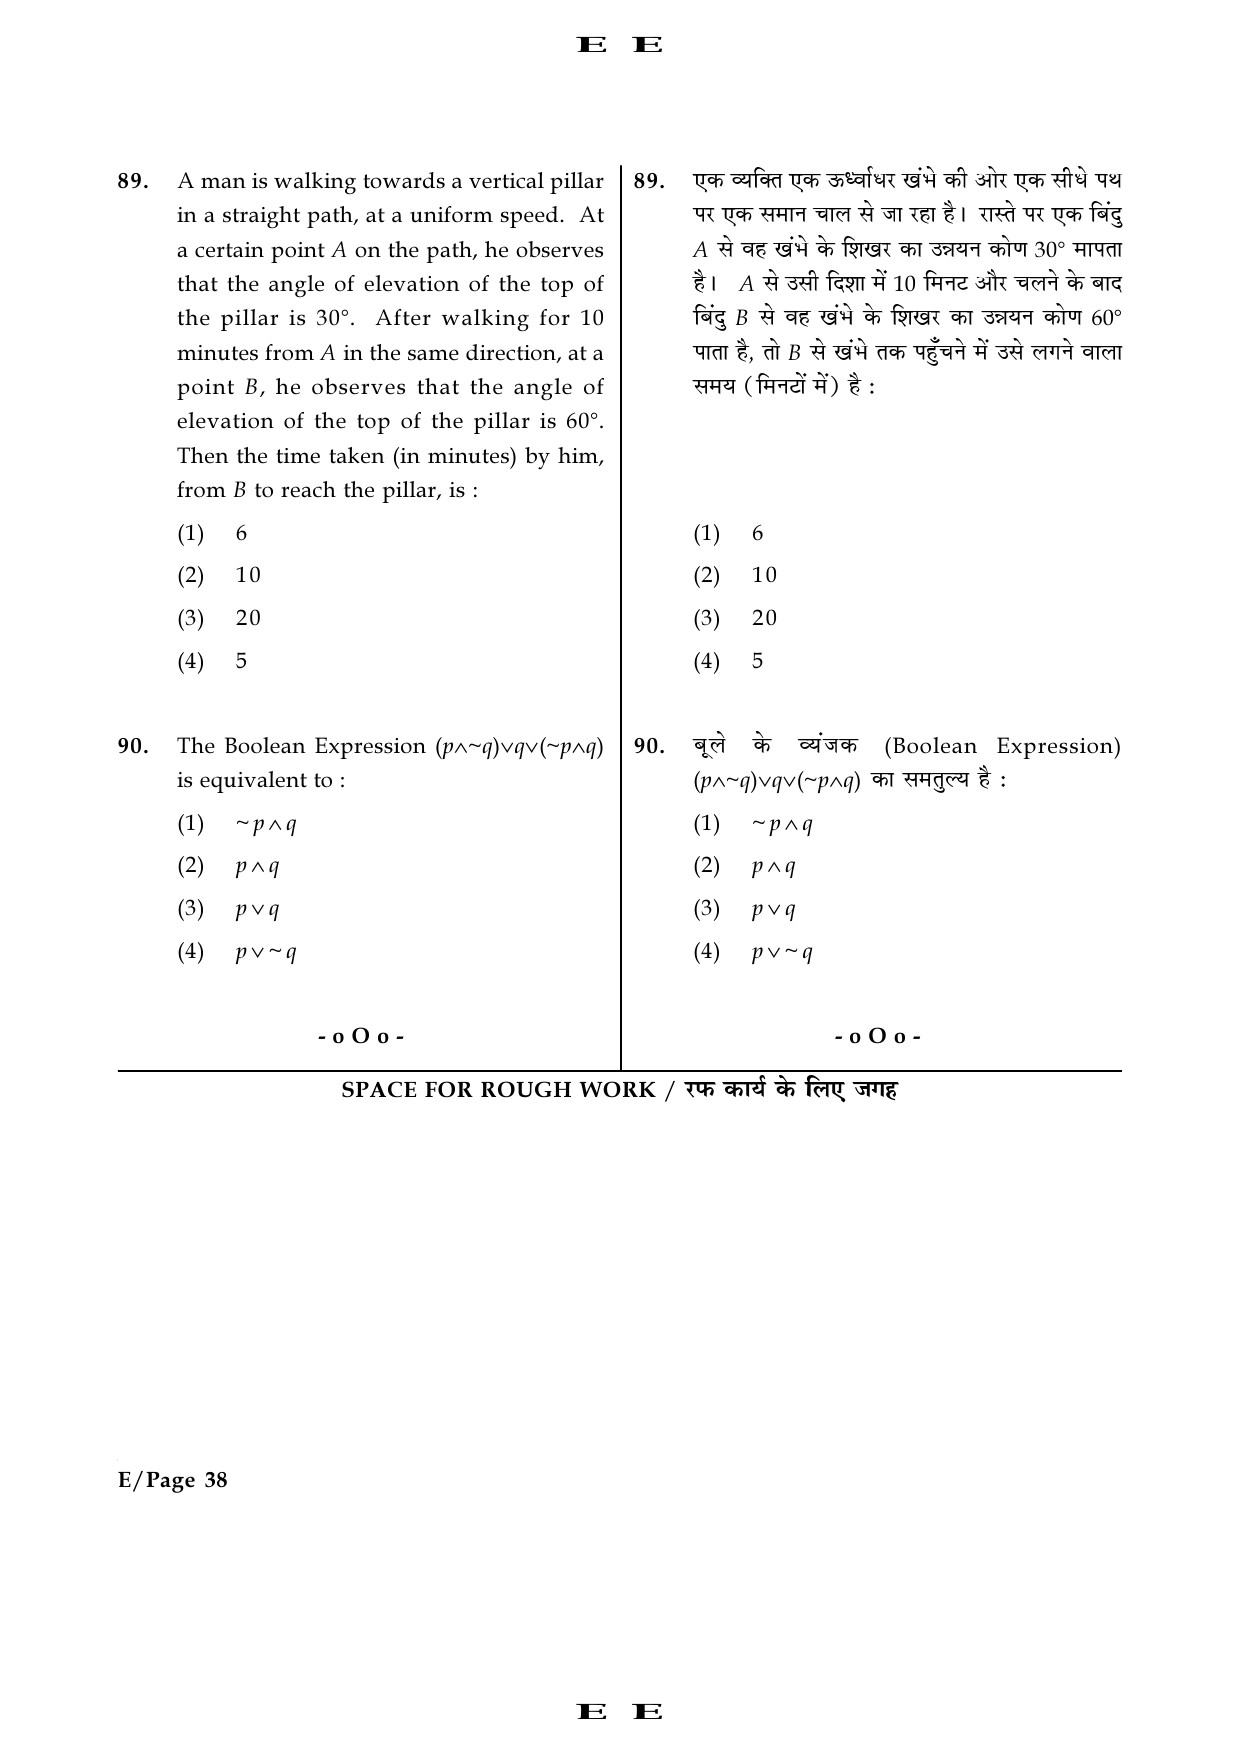 JEE Main Exam Question Paper 2016 Booklet E 38